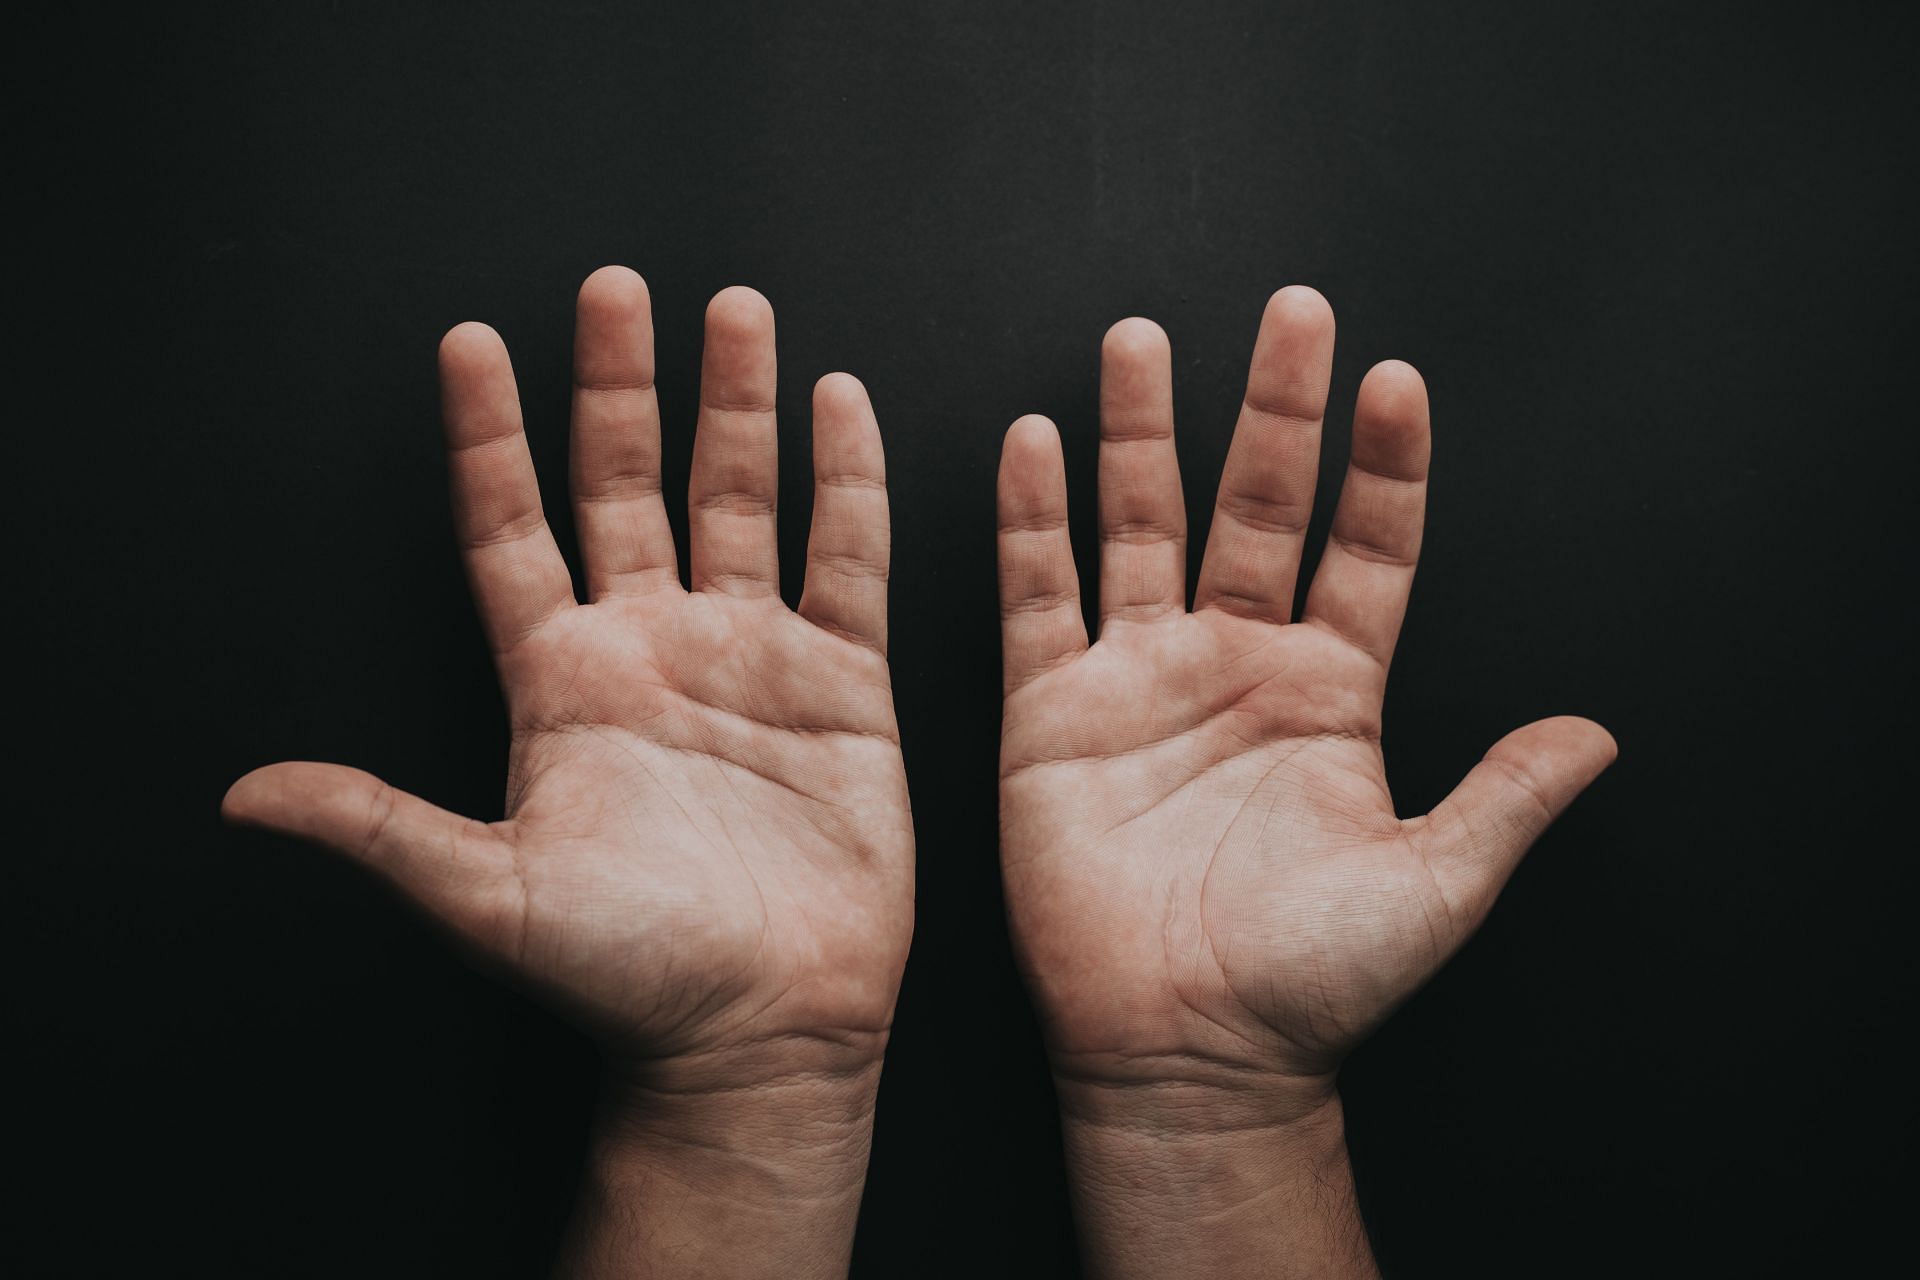 Numbness in hands while sleeping can be due to different causes. (Image via Unsplash/ Luis Quintero)